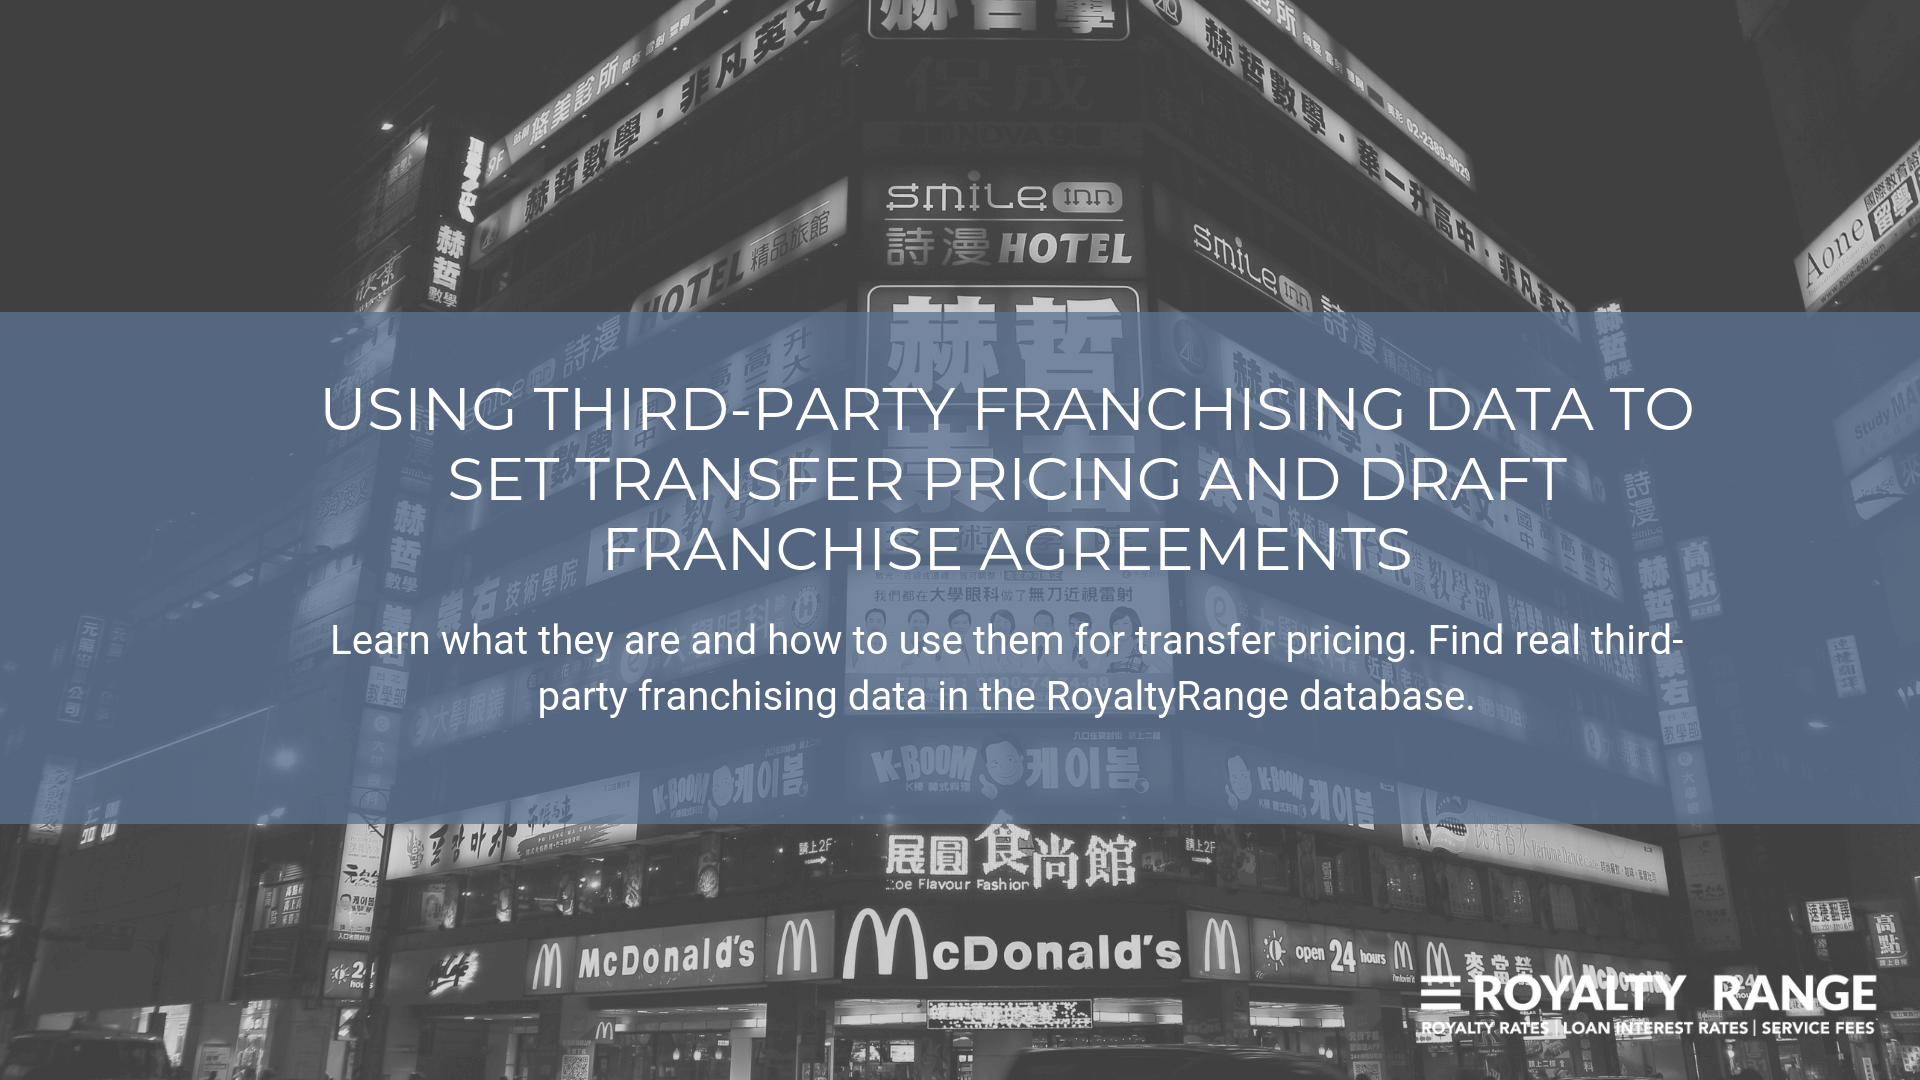 USING THIRD-PARTY FRANCHISING DATA TO SET TRANSFER PRICING AND DRAFT FRANCHISE AGREEMENTS